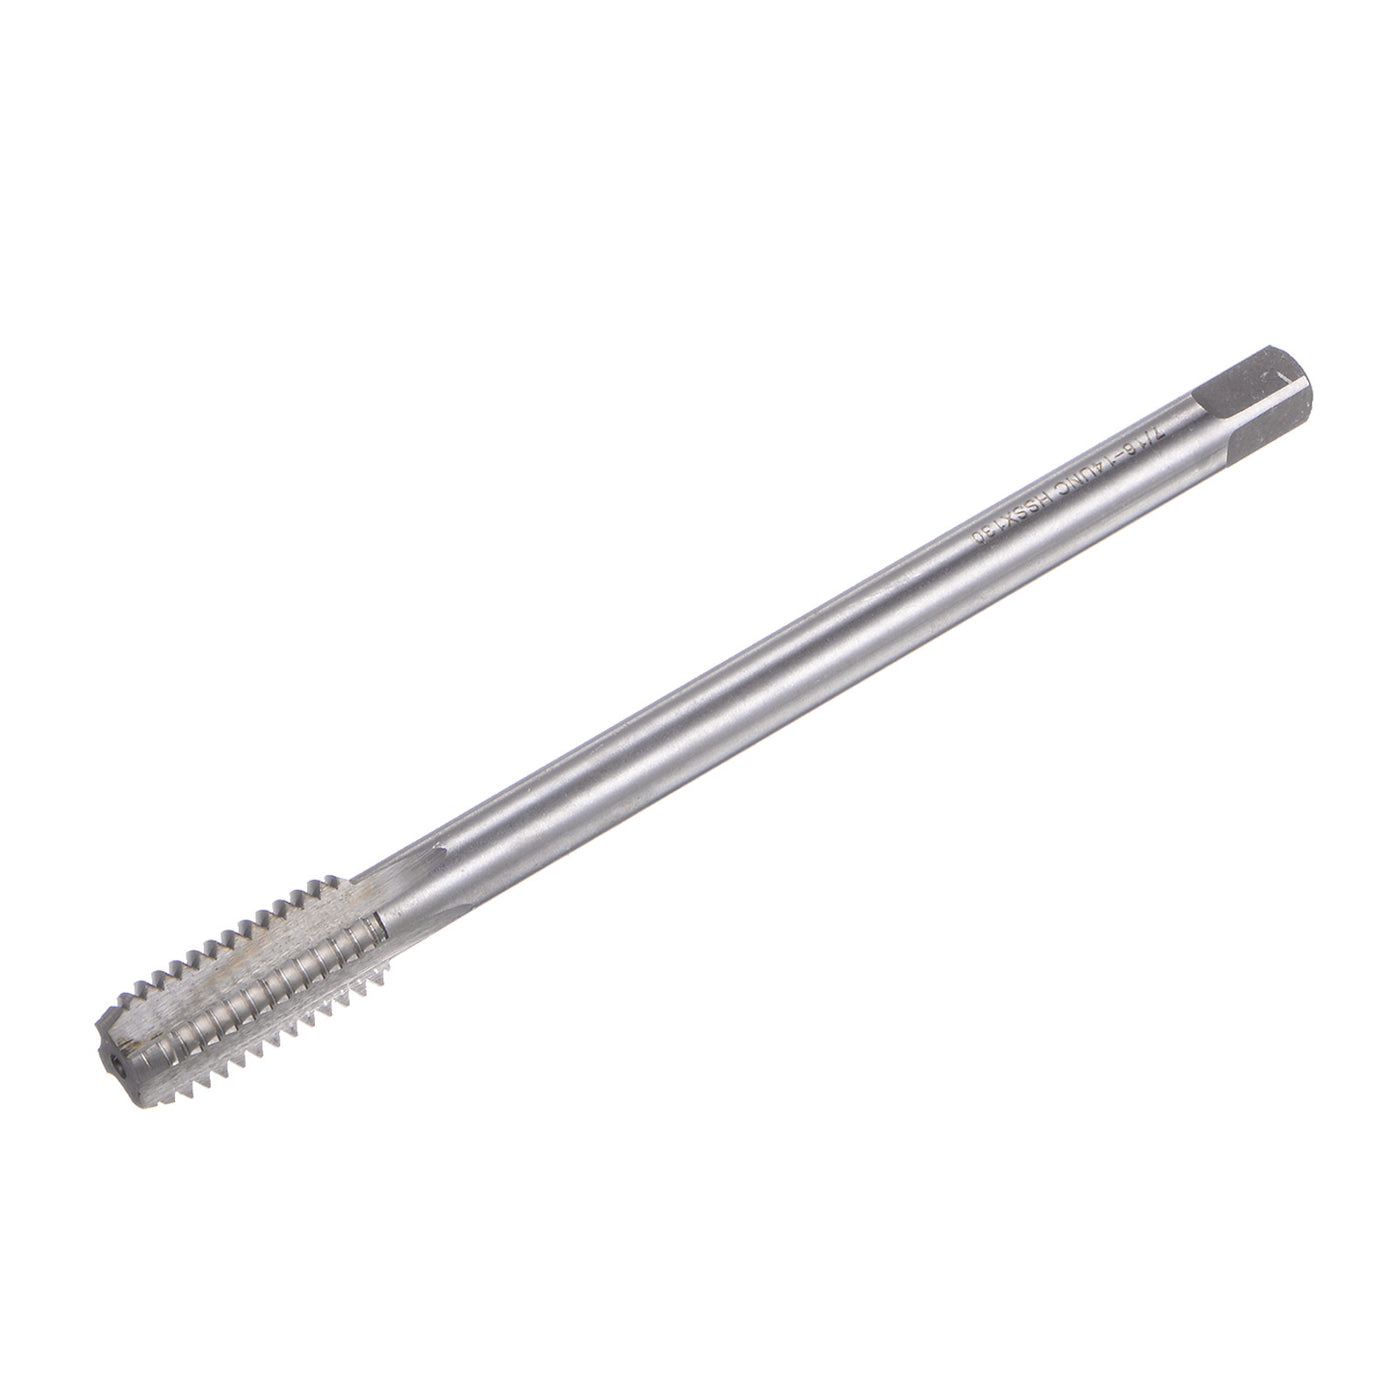 Uxcell Uxcell 9/16-12 UNC High Speed Steel 5" Length 4 Straight Flute Machine Screw Thread Tap